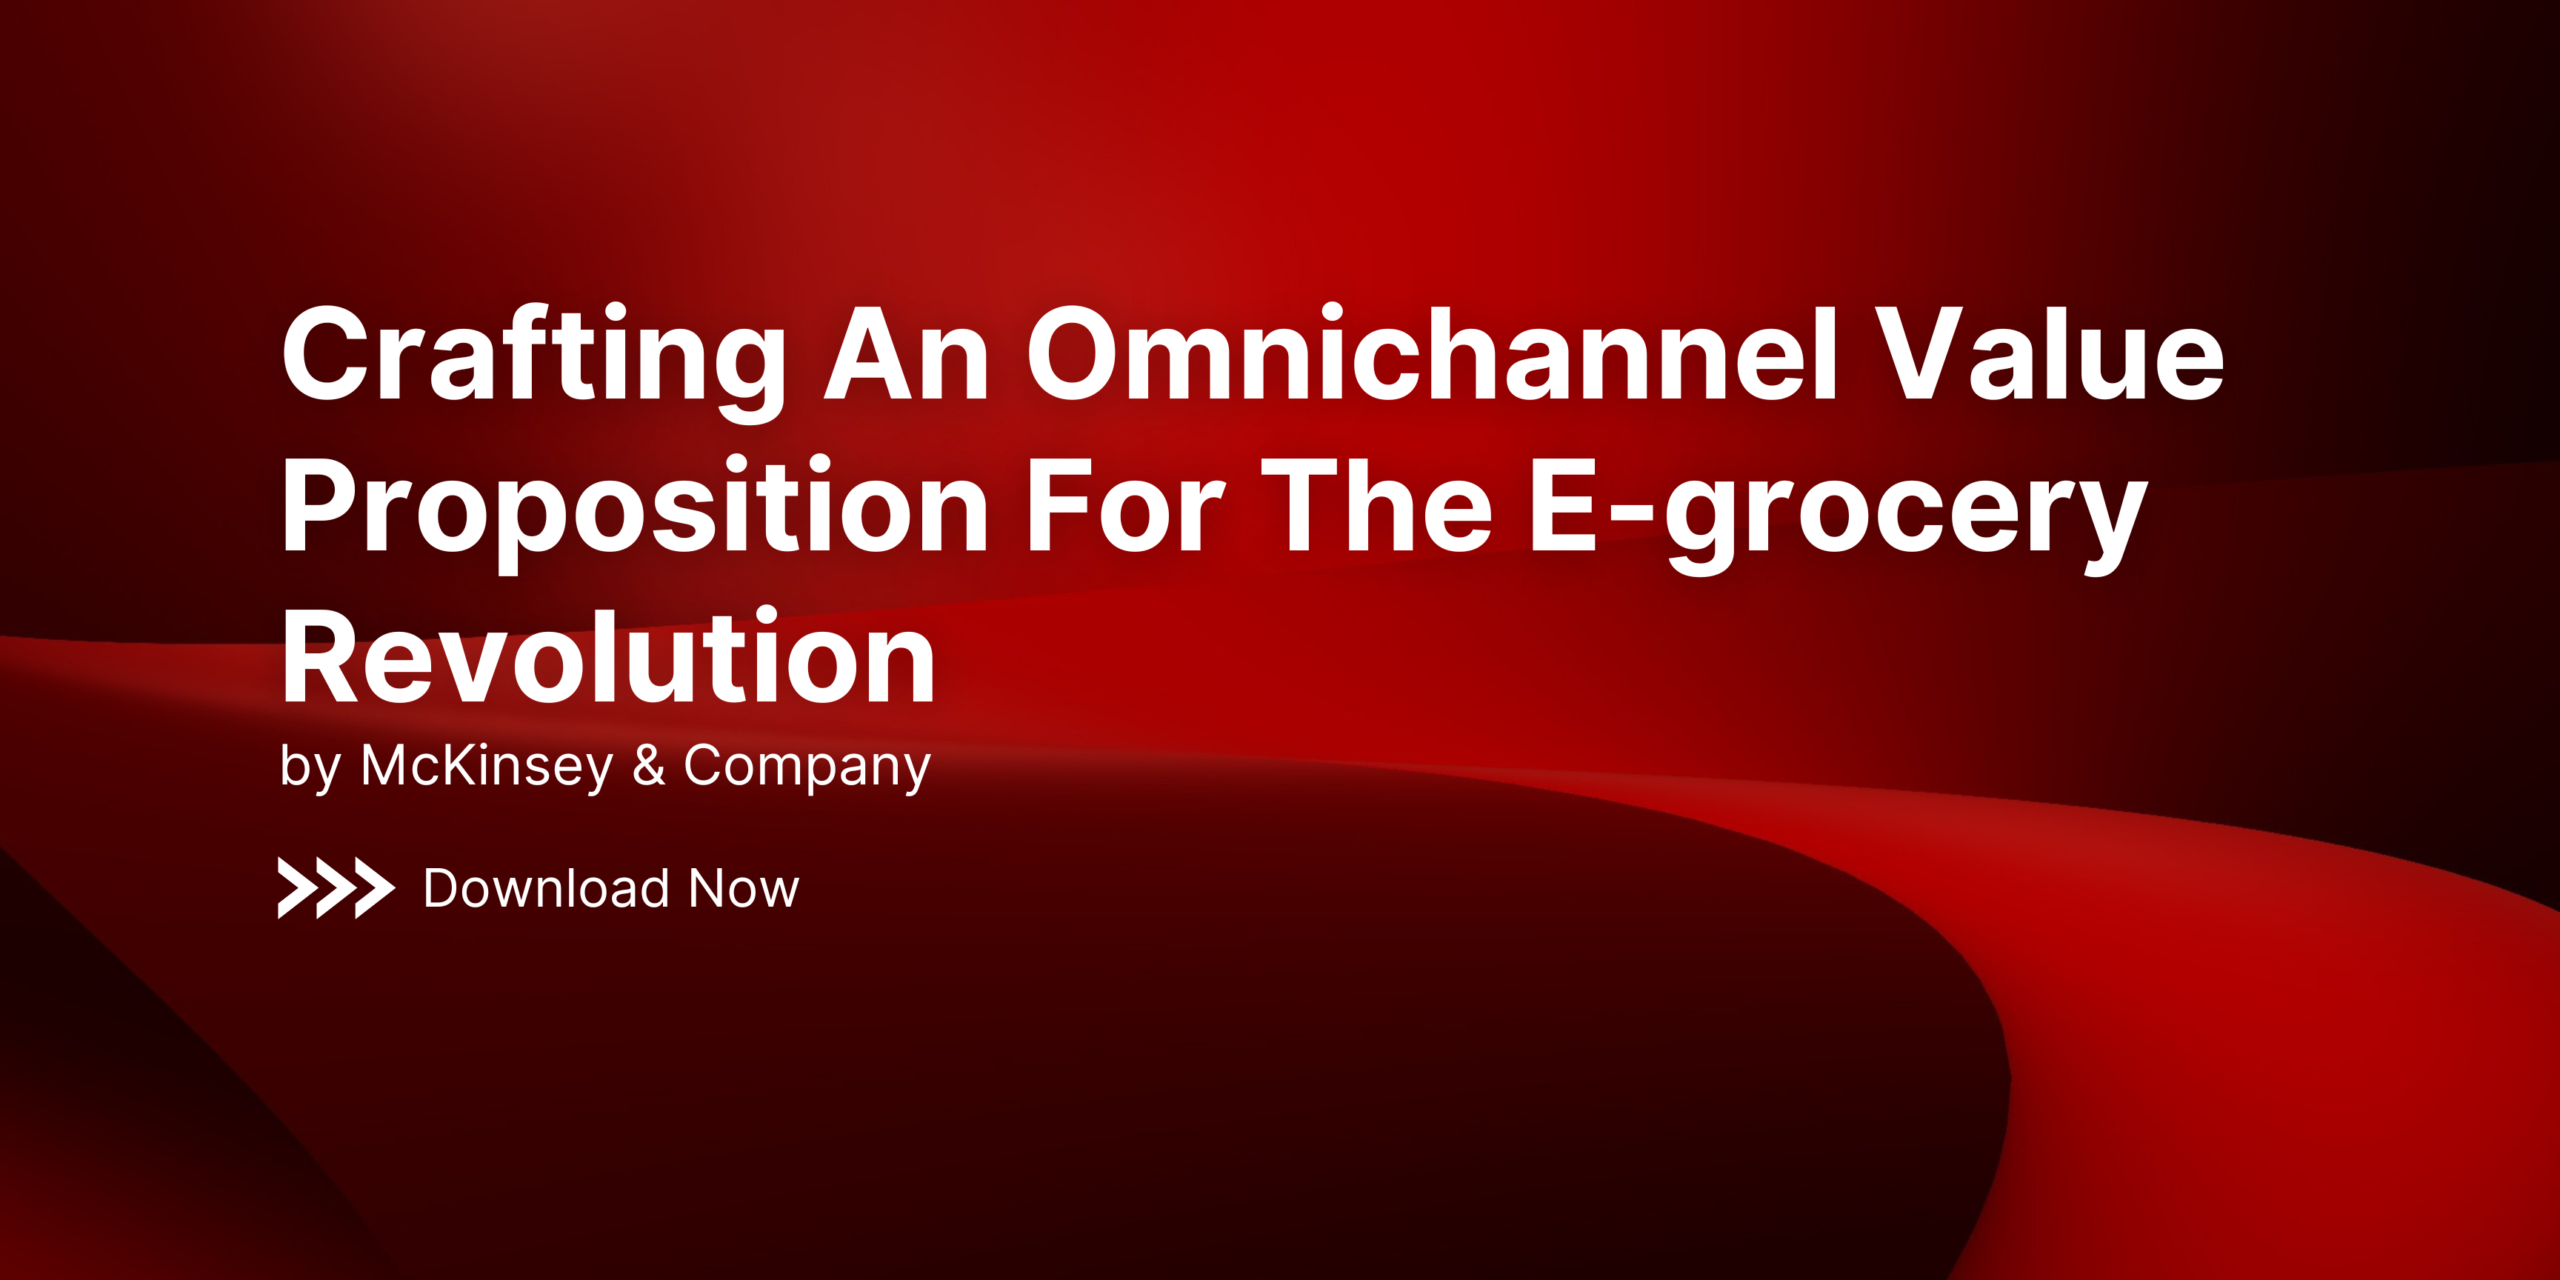 Crafting An Omnichannel Value Proposition For The E-grocery Revolution